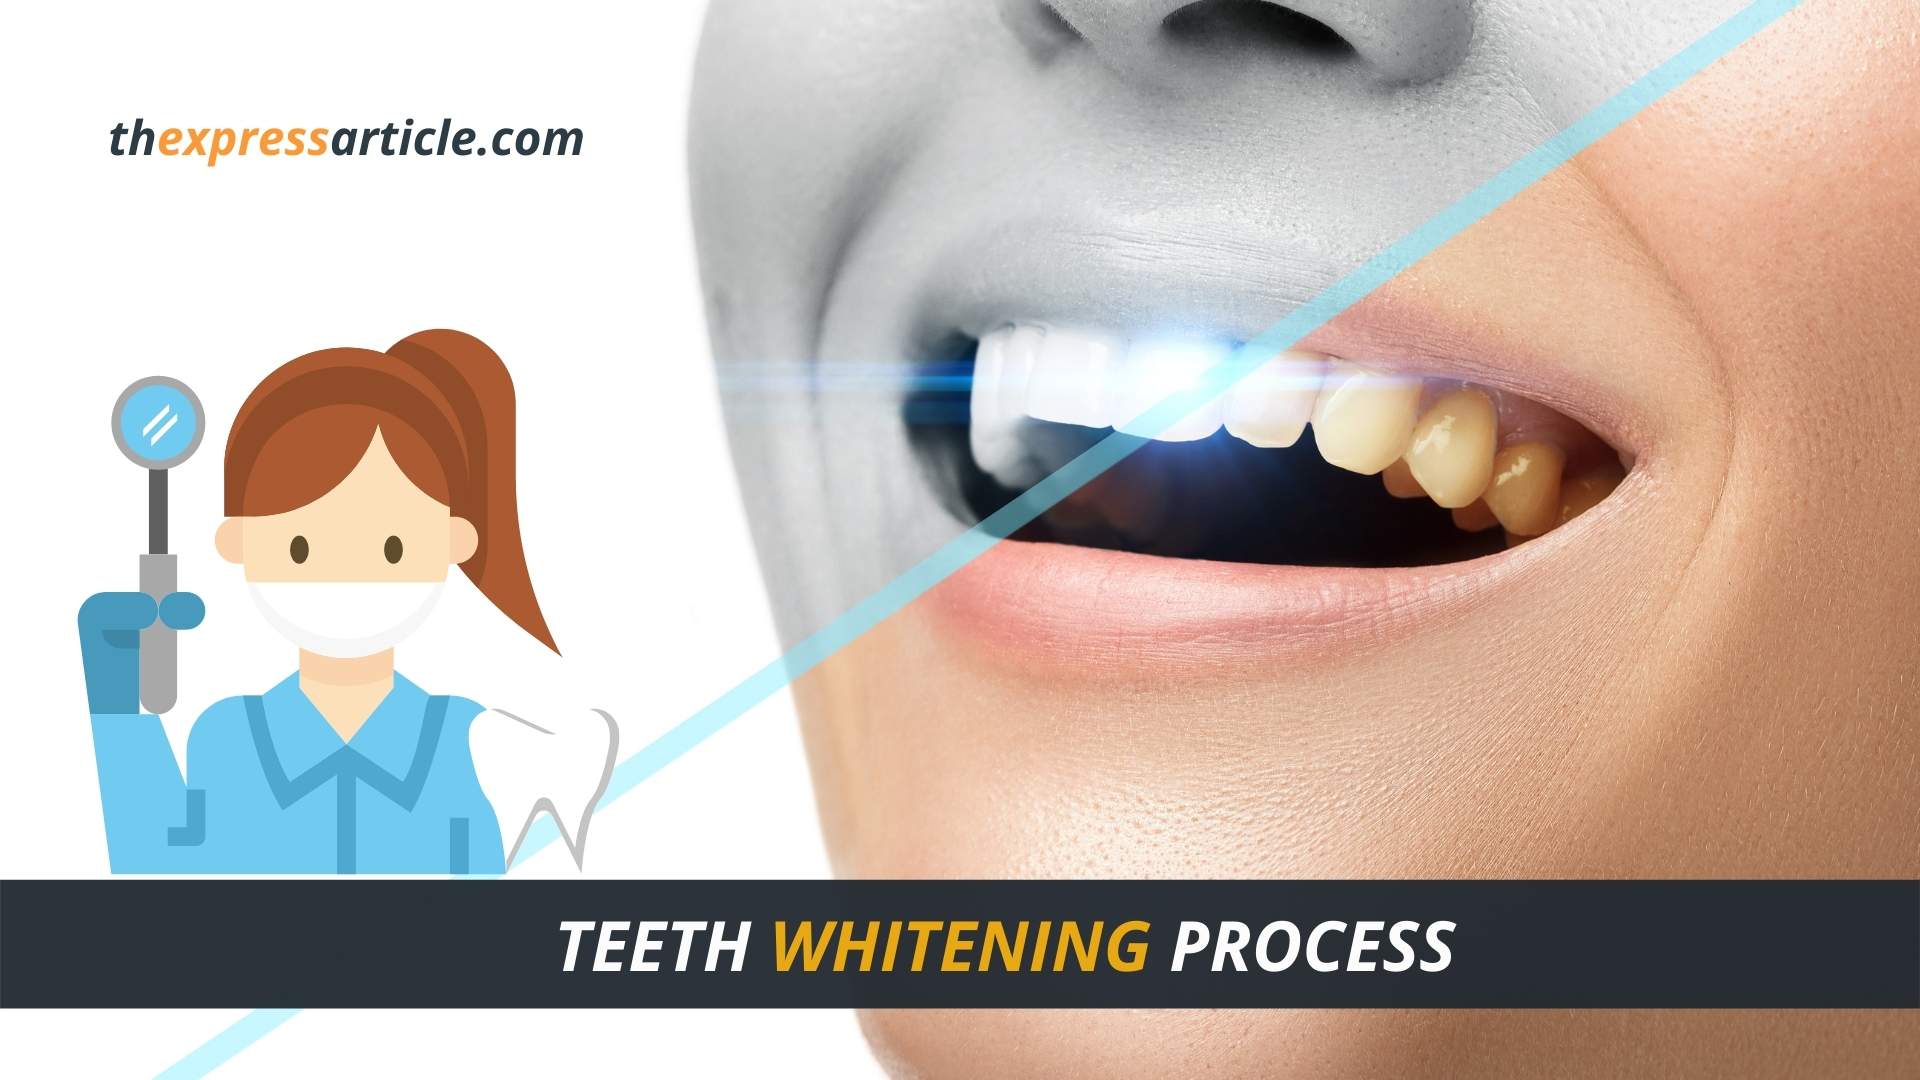 What is Teeth Whitening Process